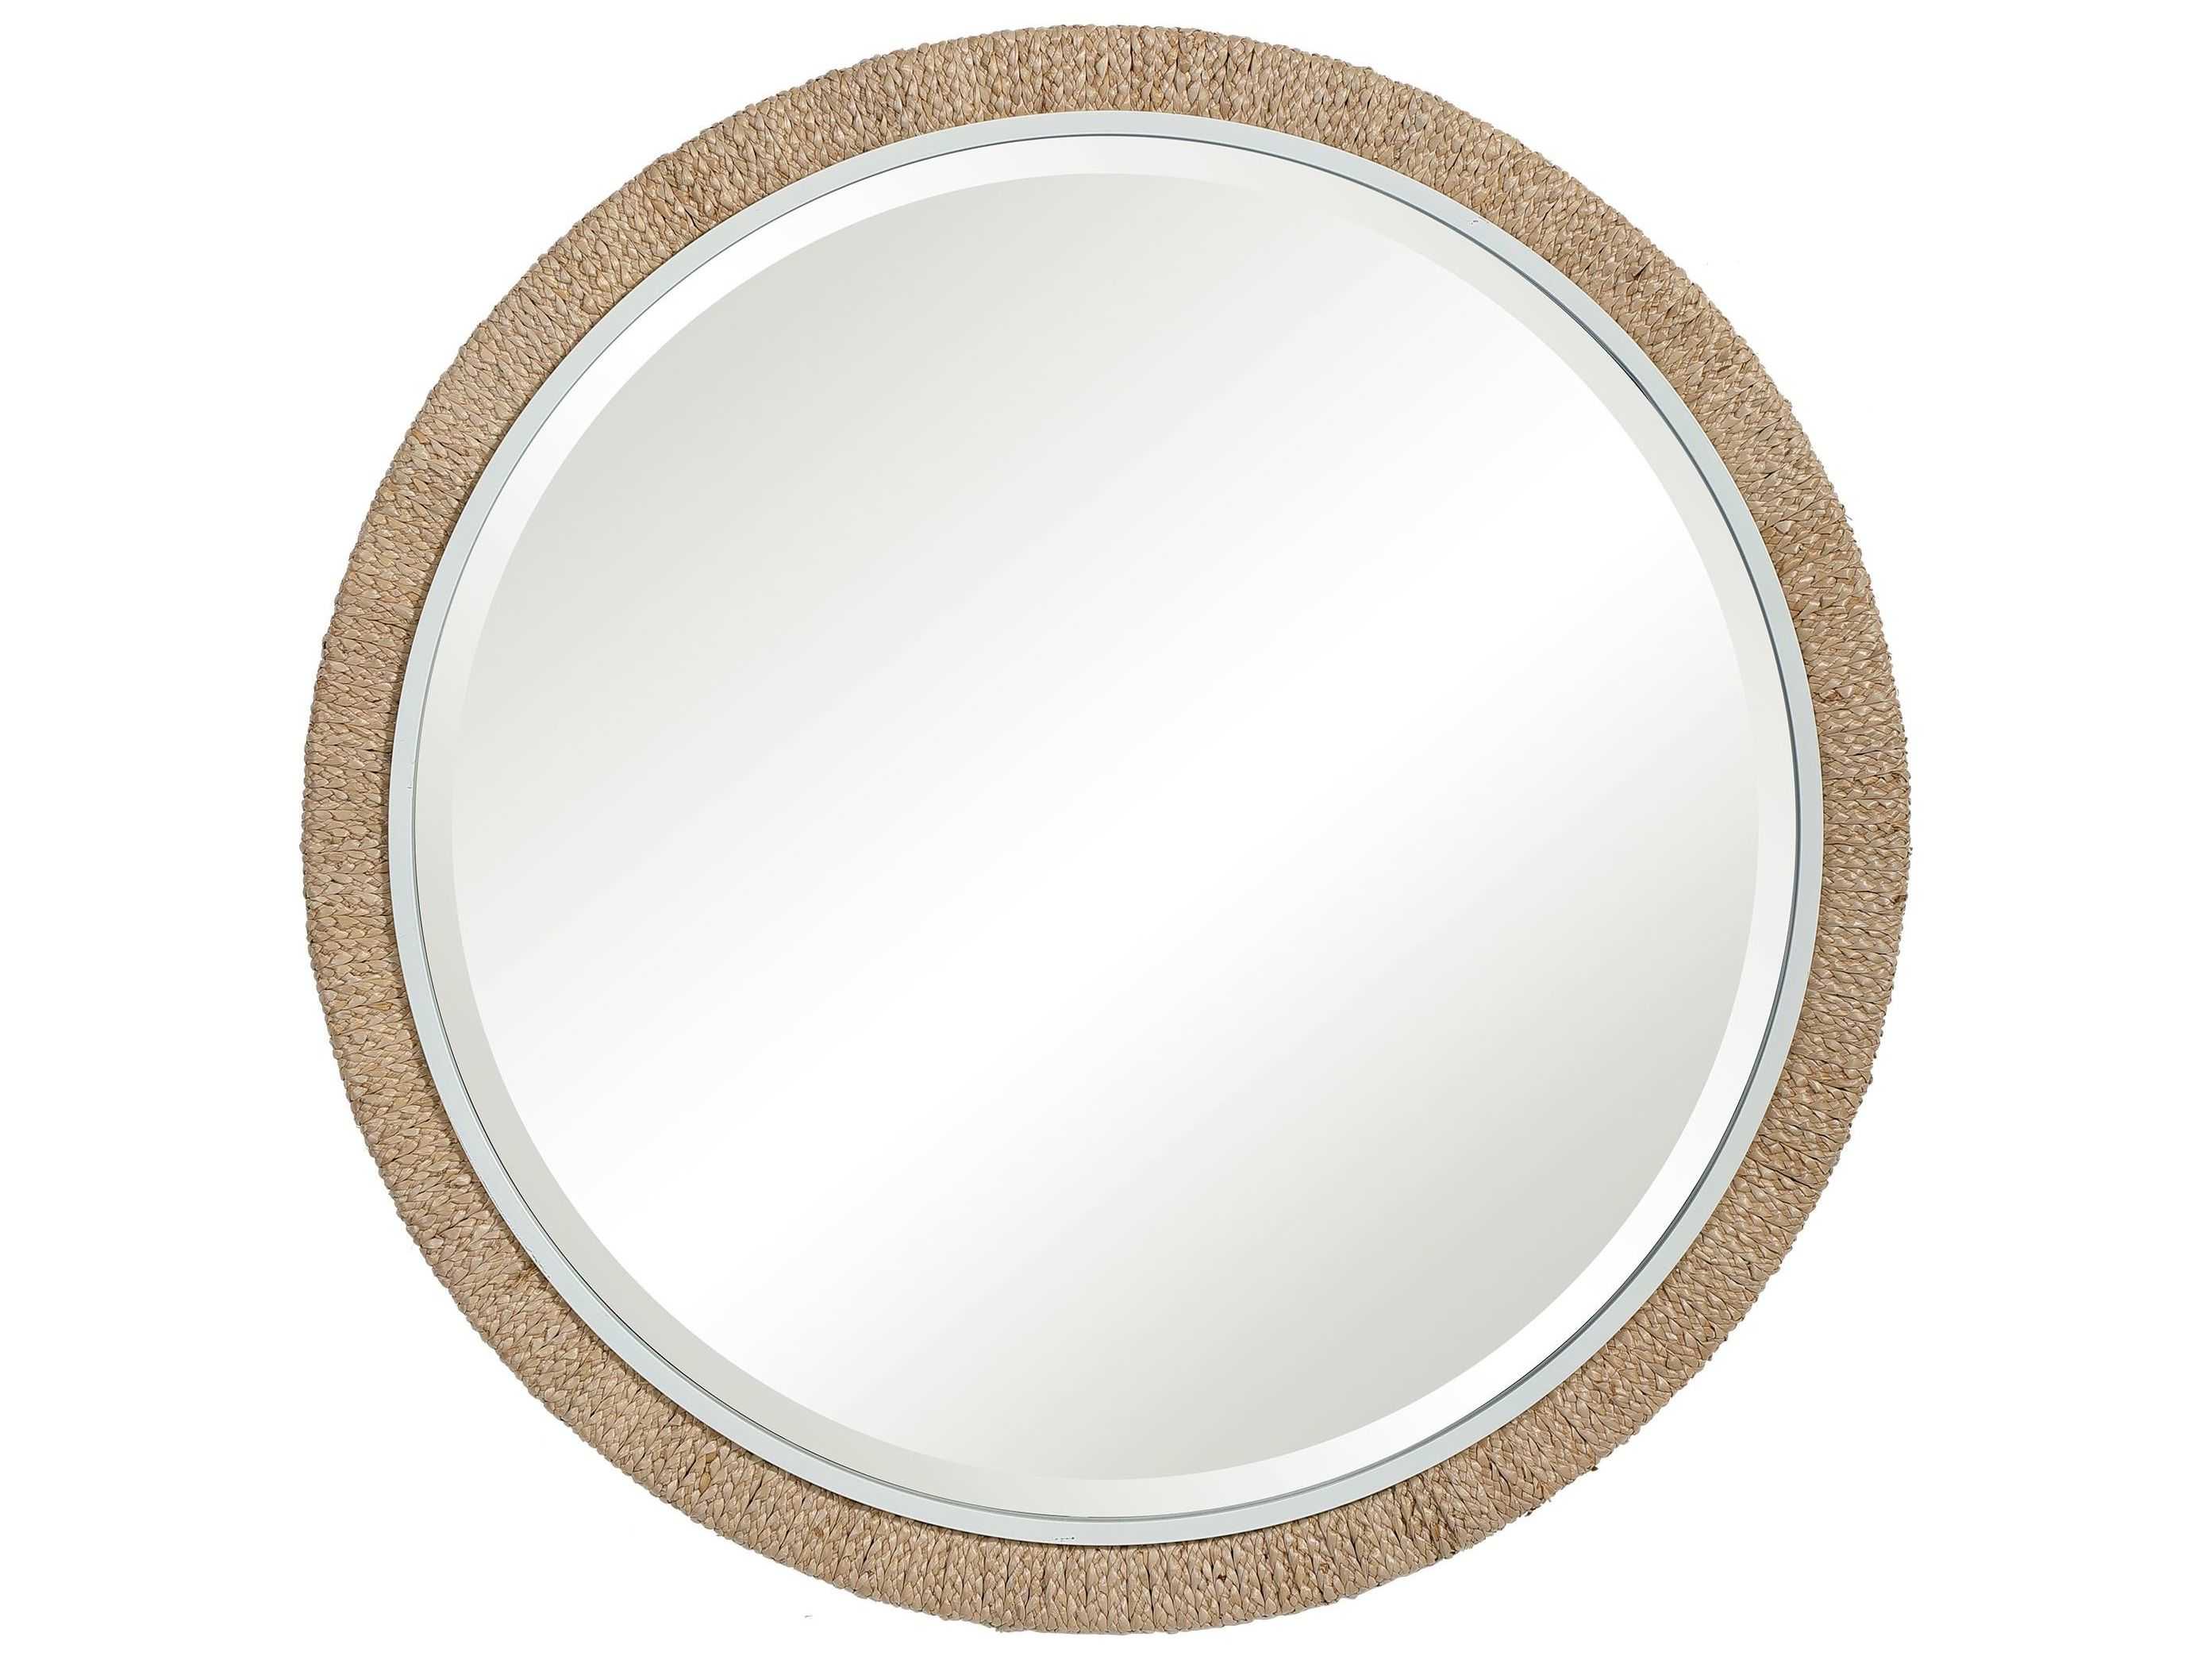 Uttermost Carbet Braided Banana Leaf, Uttermost Round Wall Mirrors